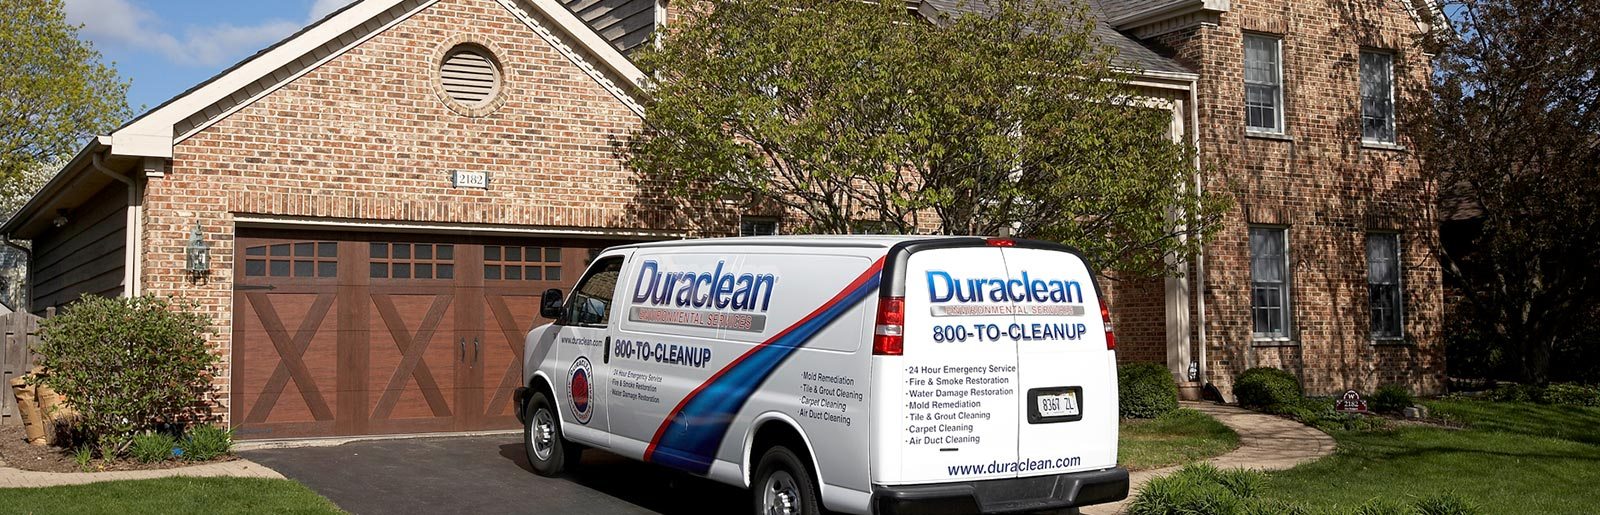 Duraclean Restoration & Cleaning Services truck at a residence